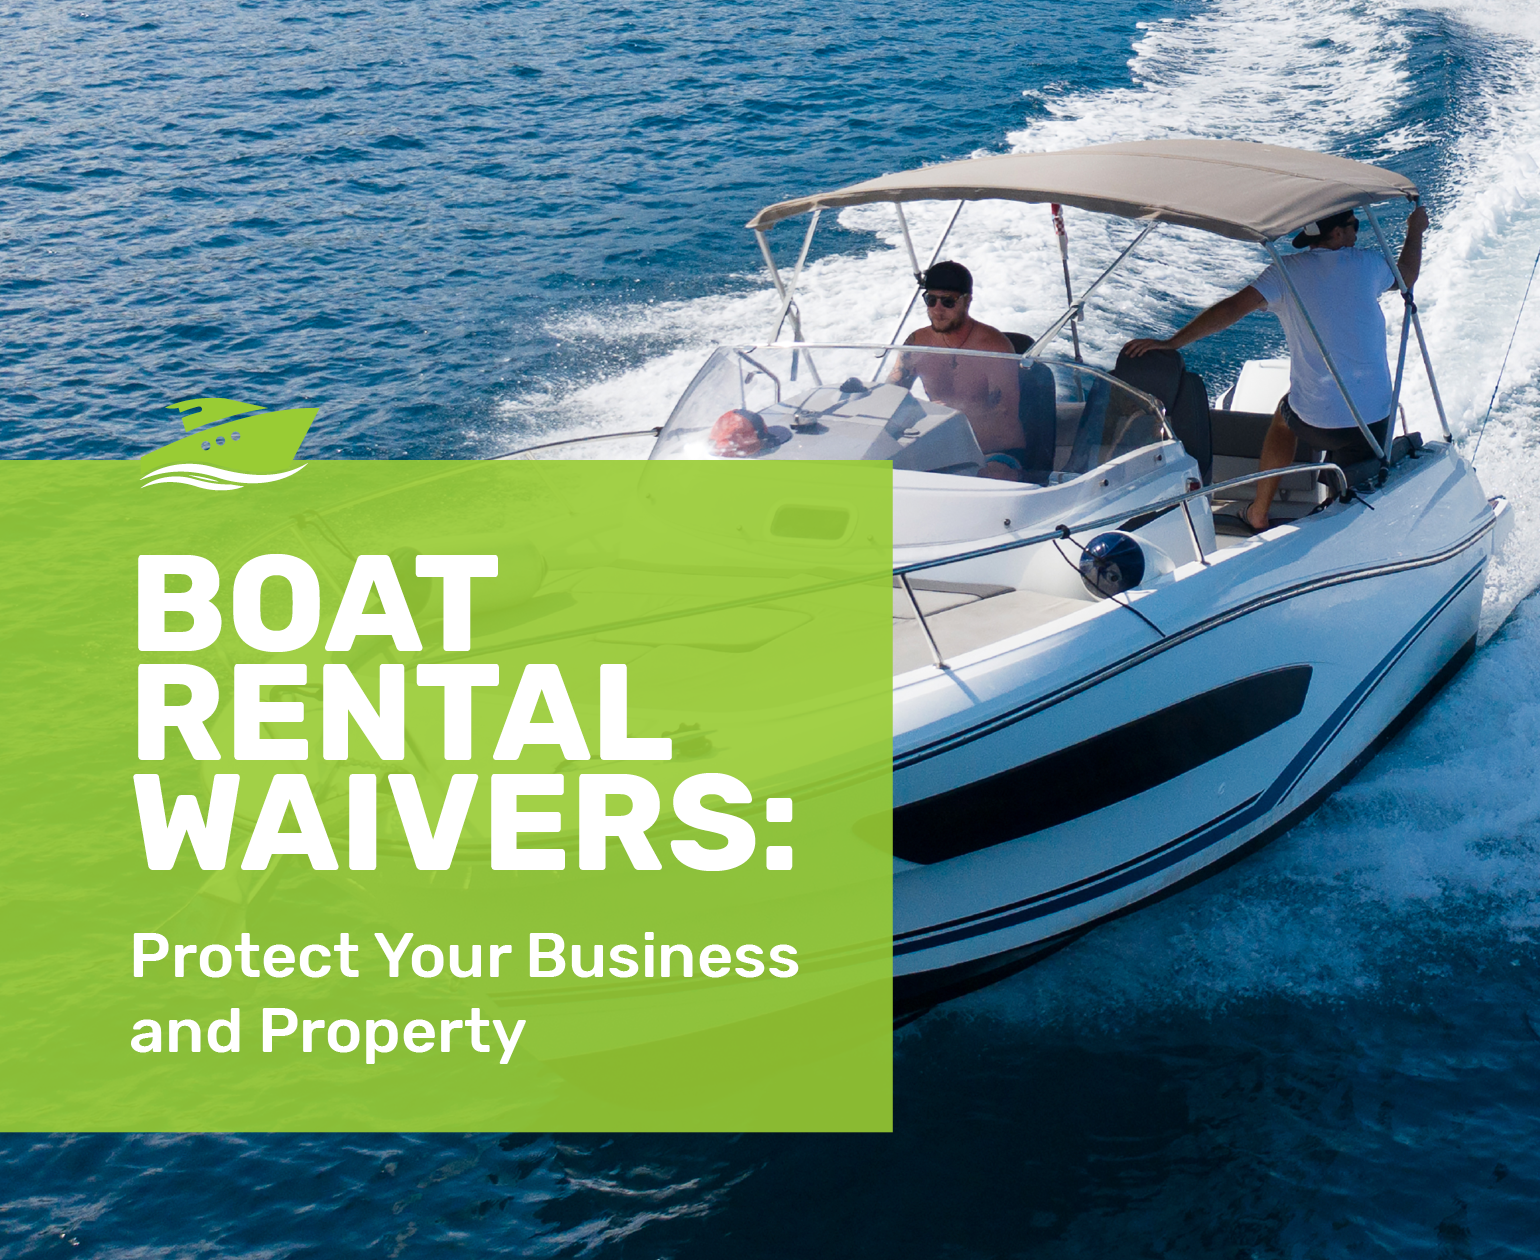 Explore this guide to learn more about using boat rental waivers to protect your business.